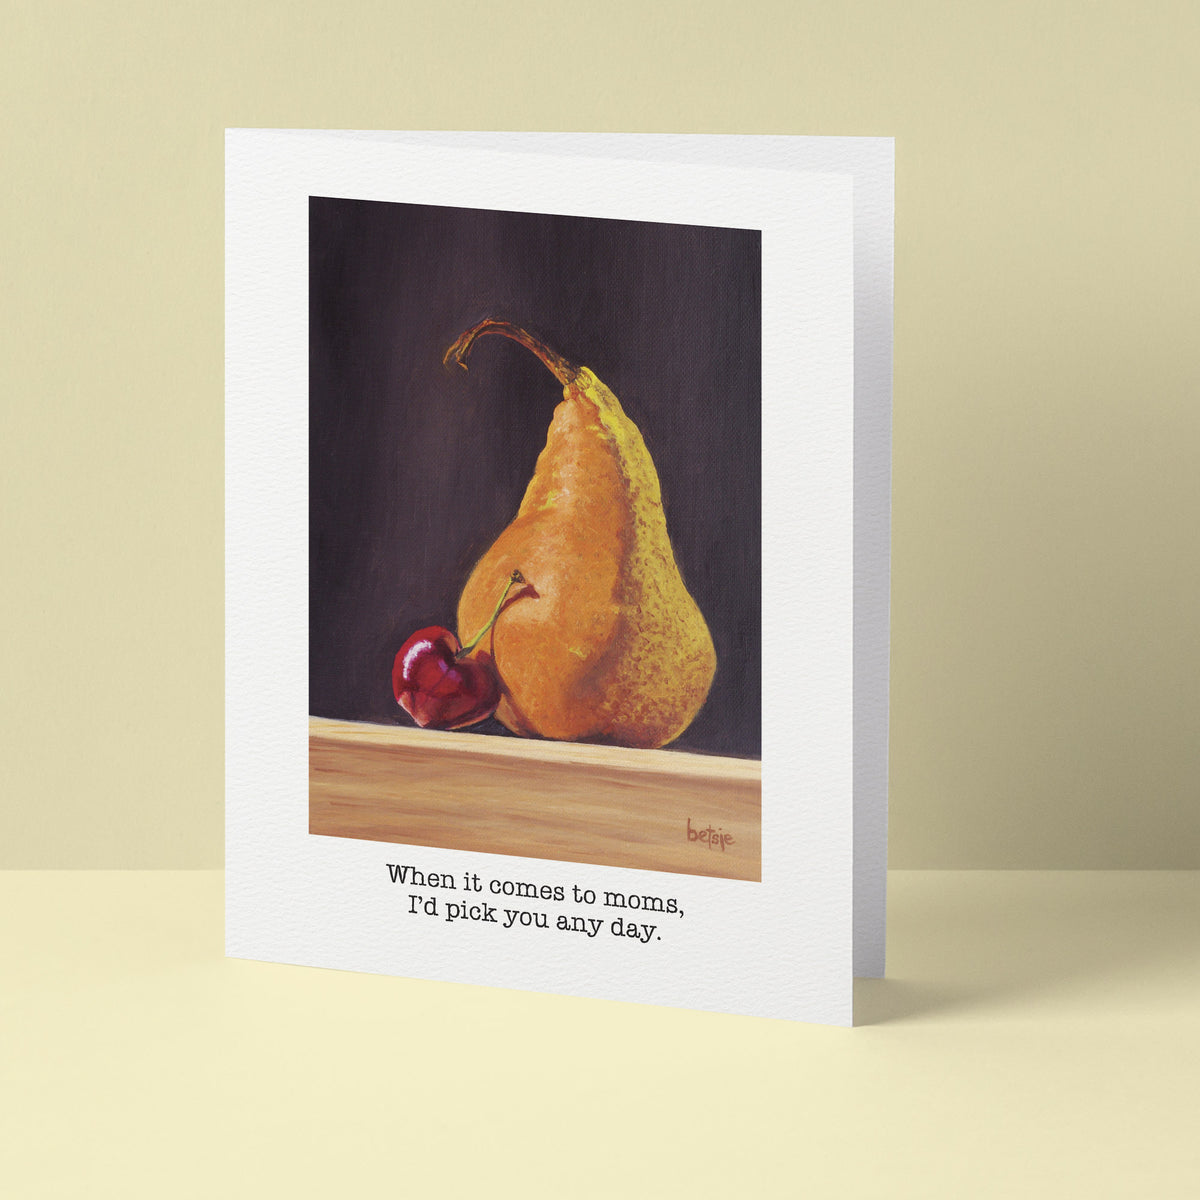 "When it comes to moms, I'd pick you any day" Greeting Card